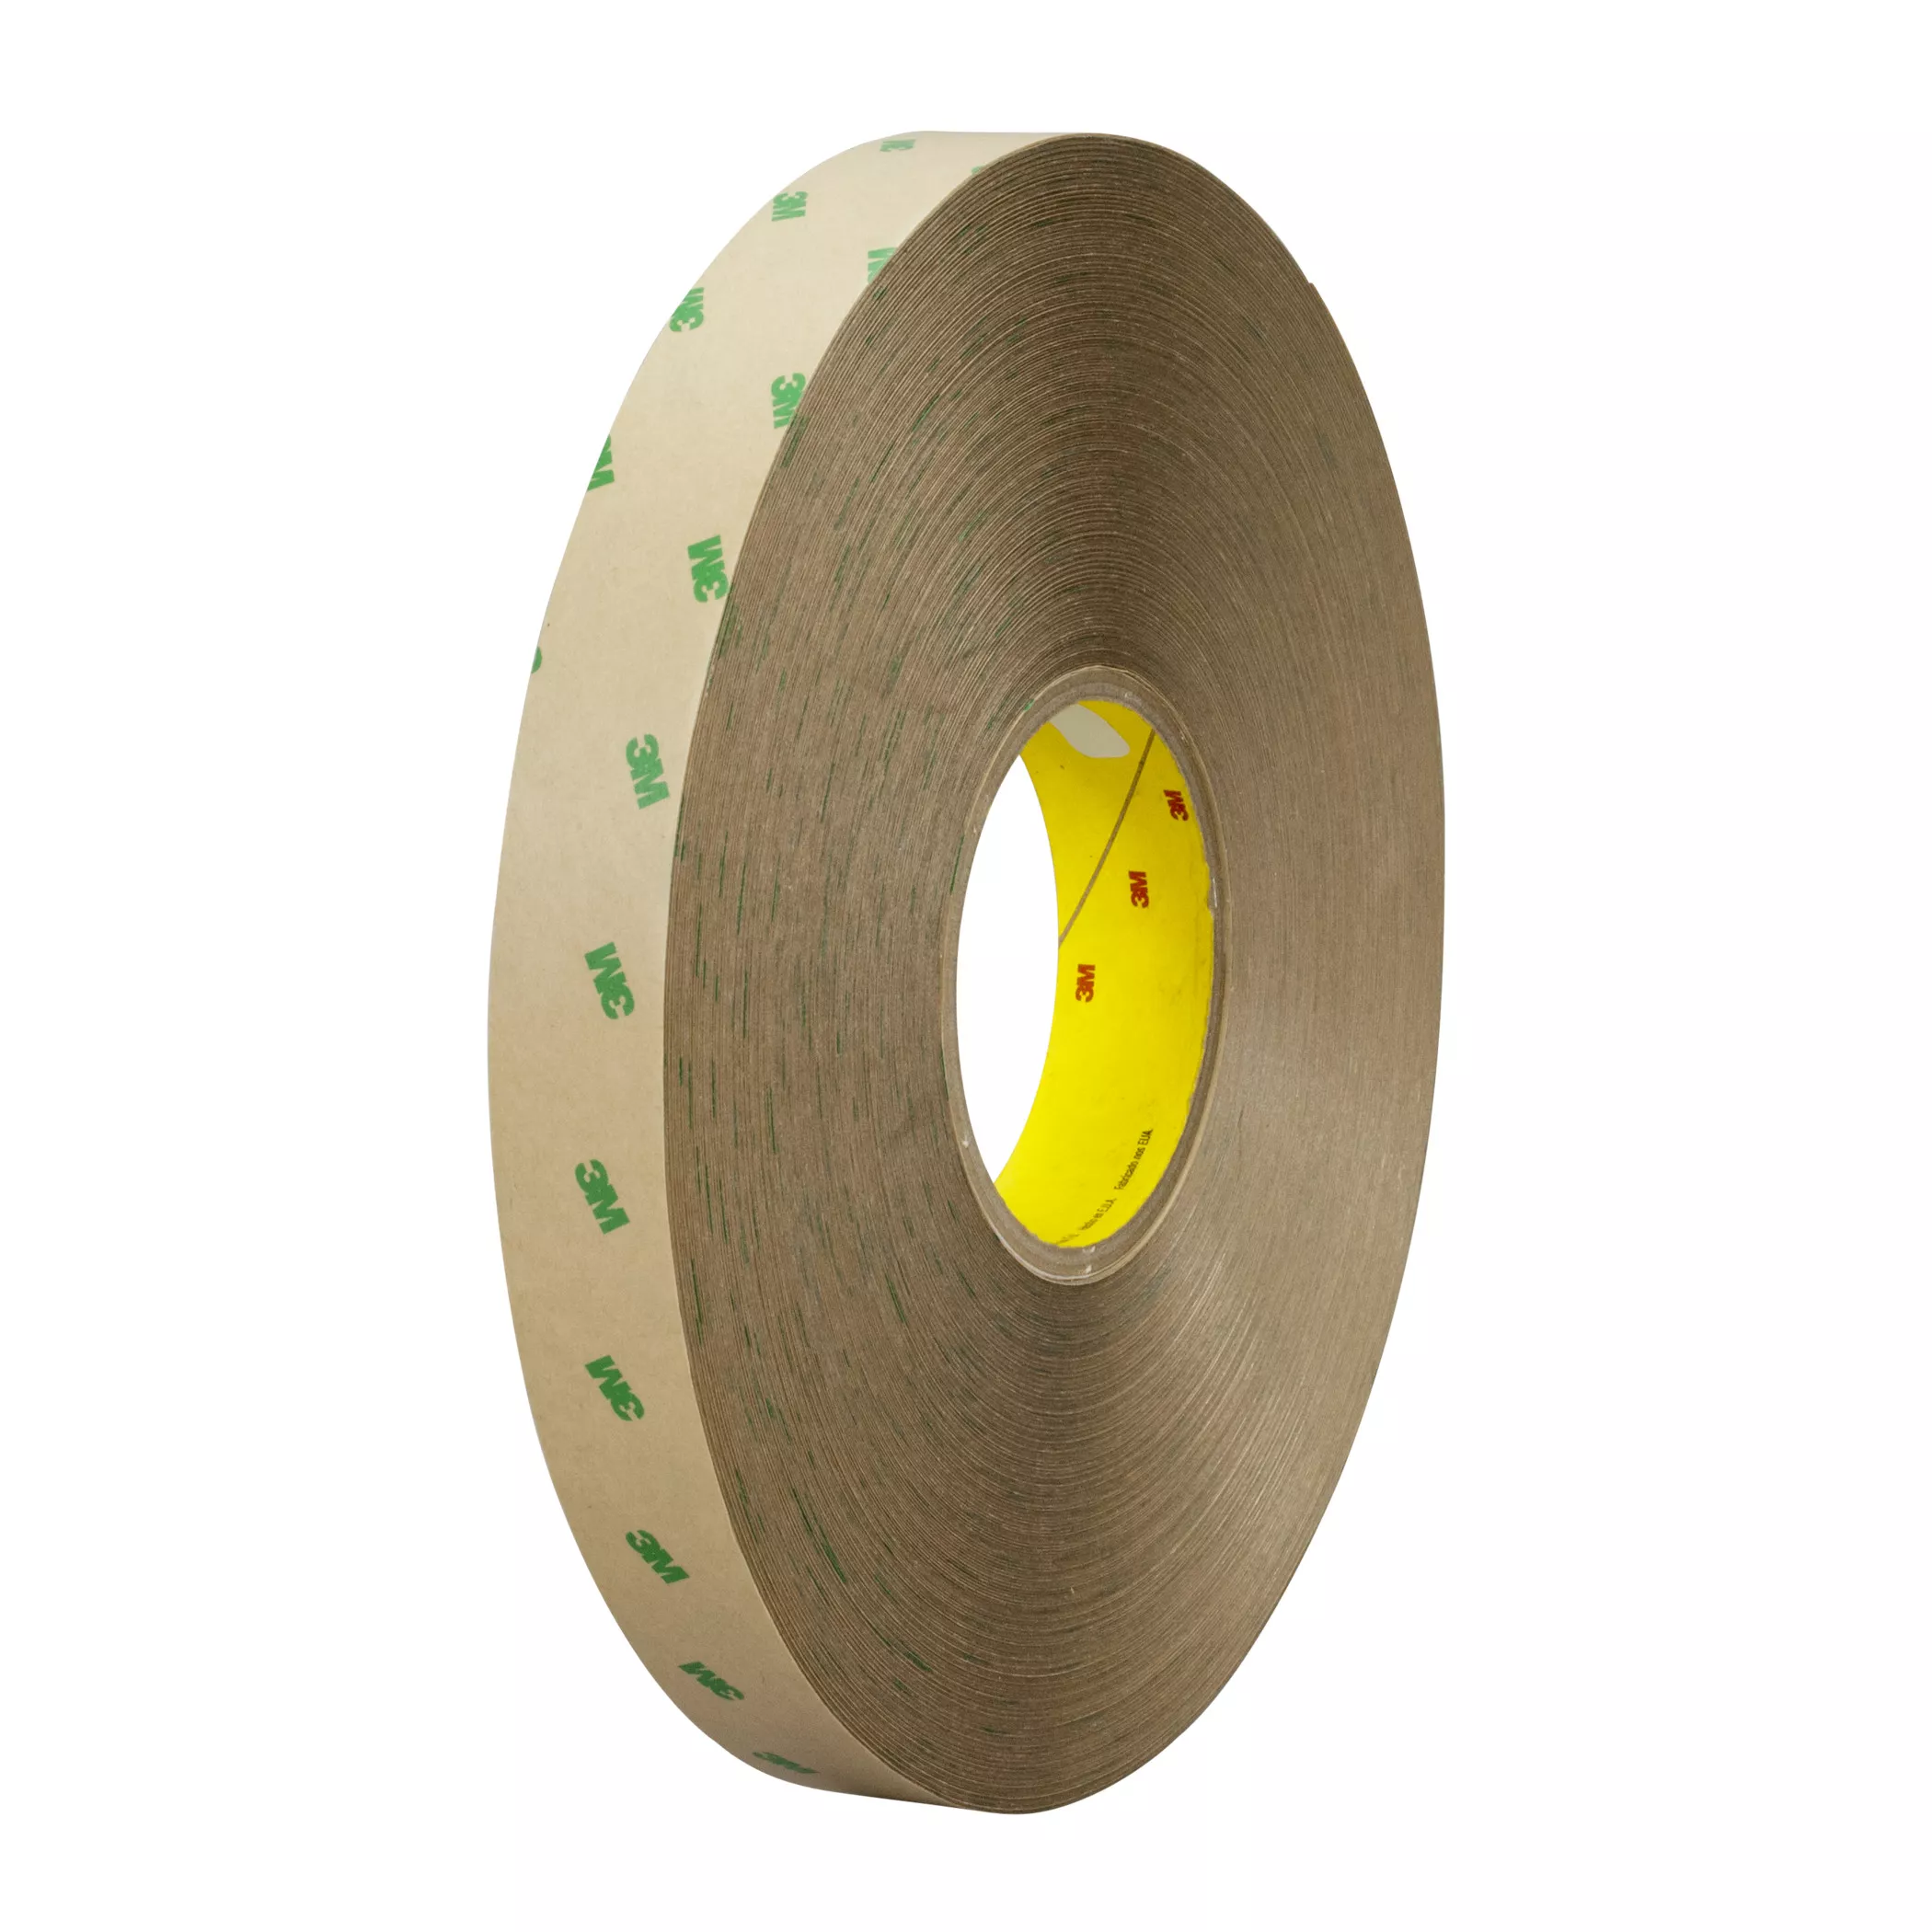 3M™ Adhesive Transfer Tape 9505, Clear, 24 in x 60 yd, 5 mil, 1 roll per
case